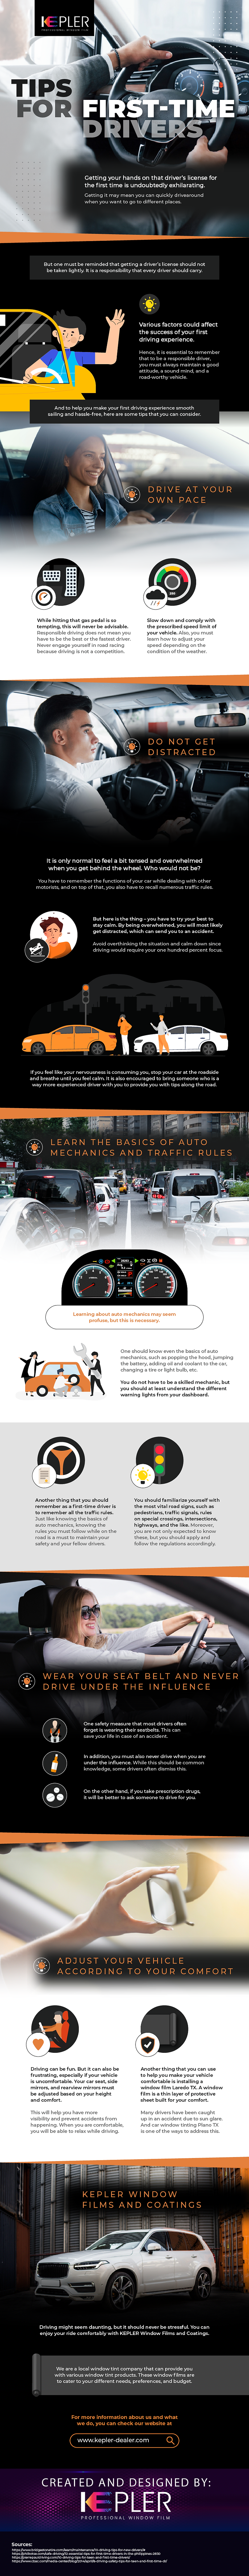 Tips For First Time Drivers - Infographic